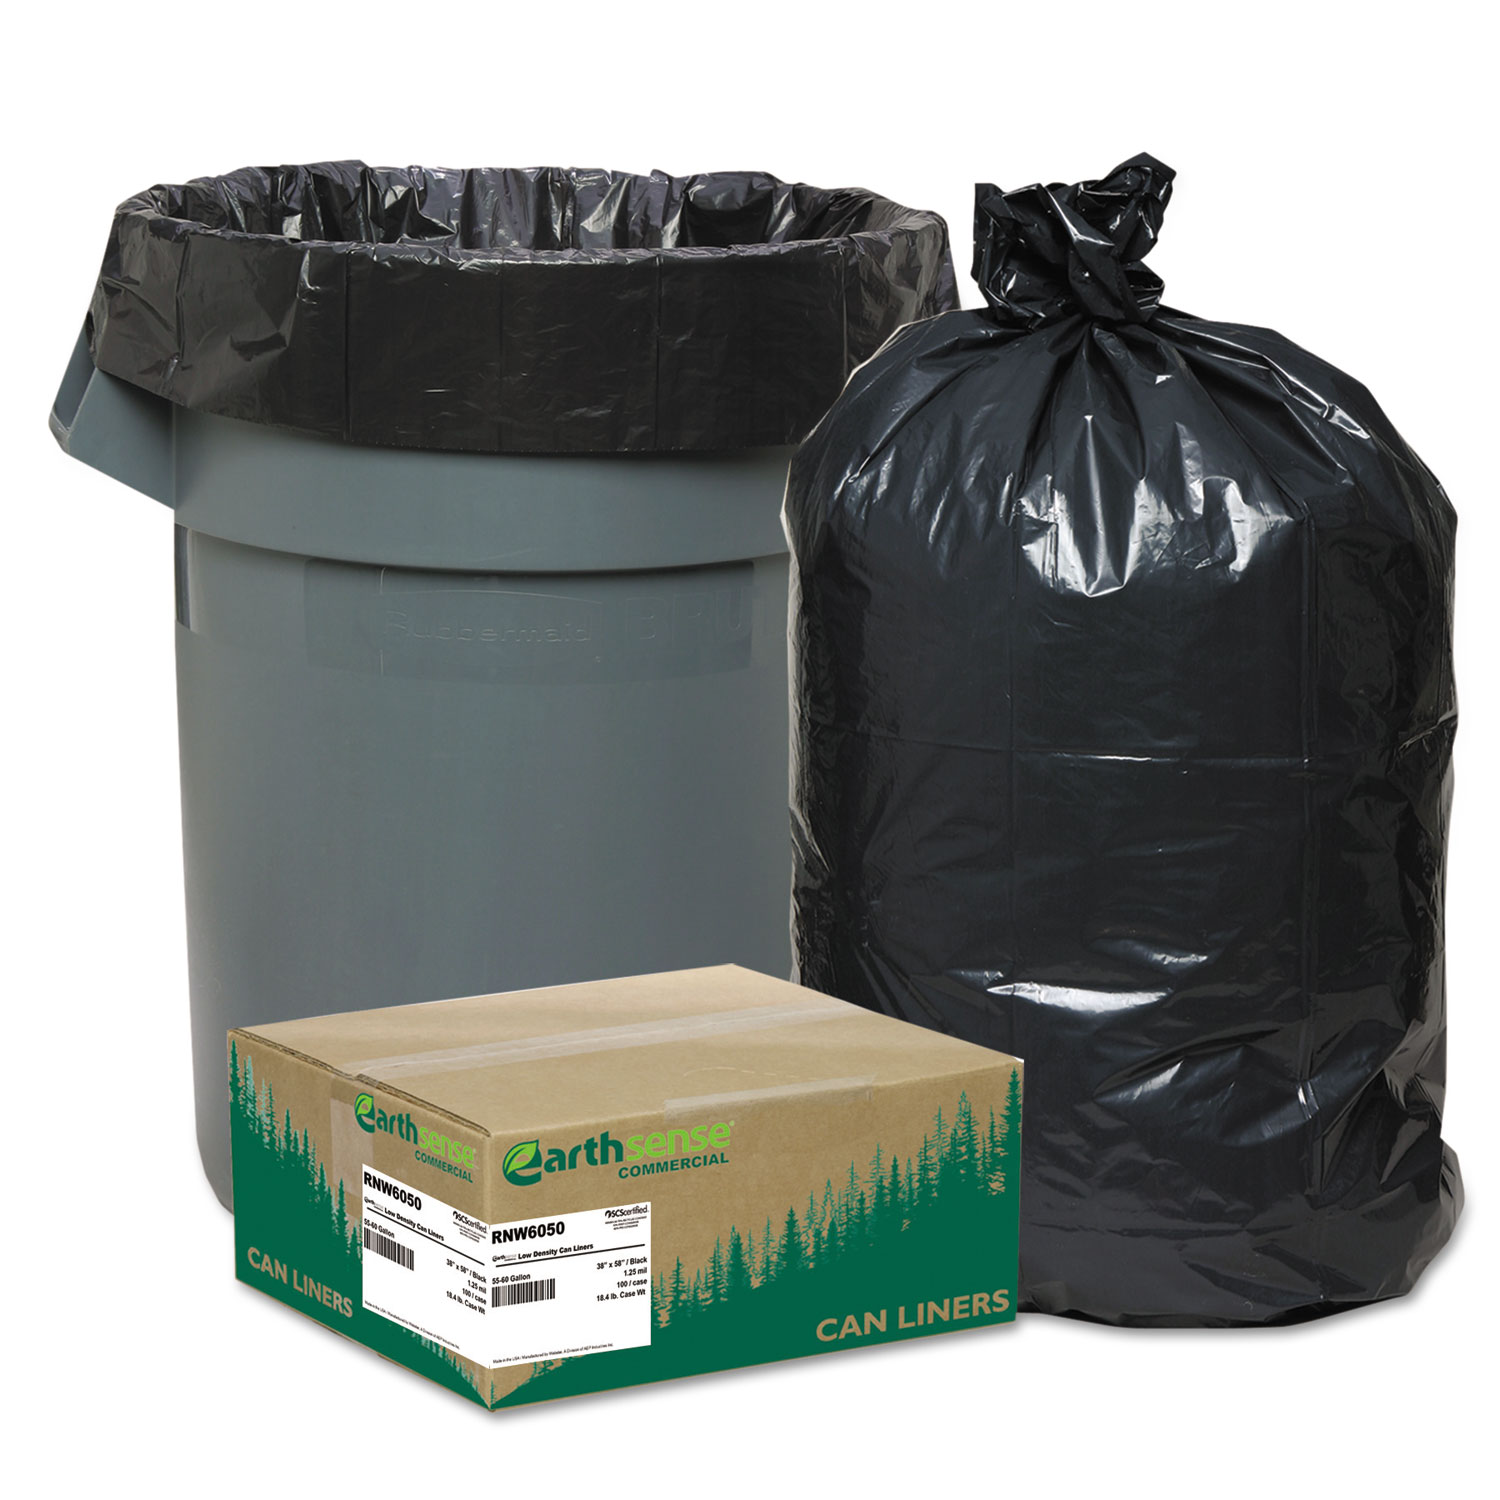  Earthsense Commercial RNW6050 Linear Low Density Recycled Can Liners, 60 gal, 1.25 mil, 38 x 58, Black, 100/Carton (WBIRNW6050) 